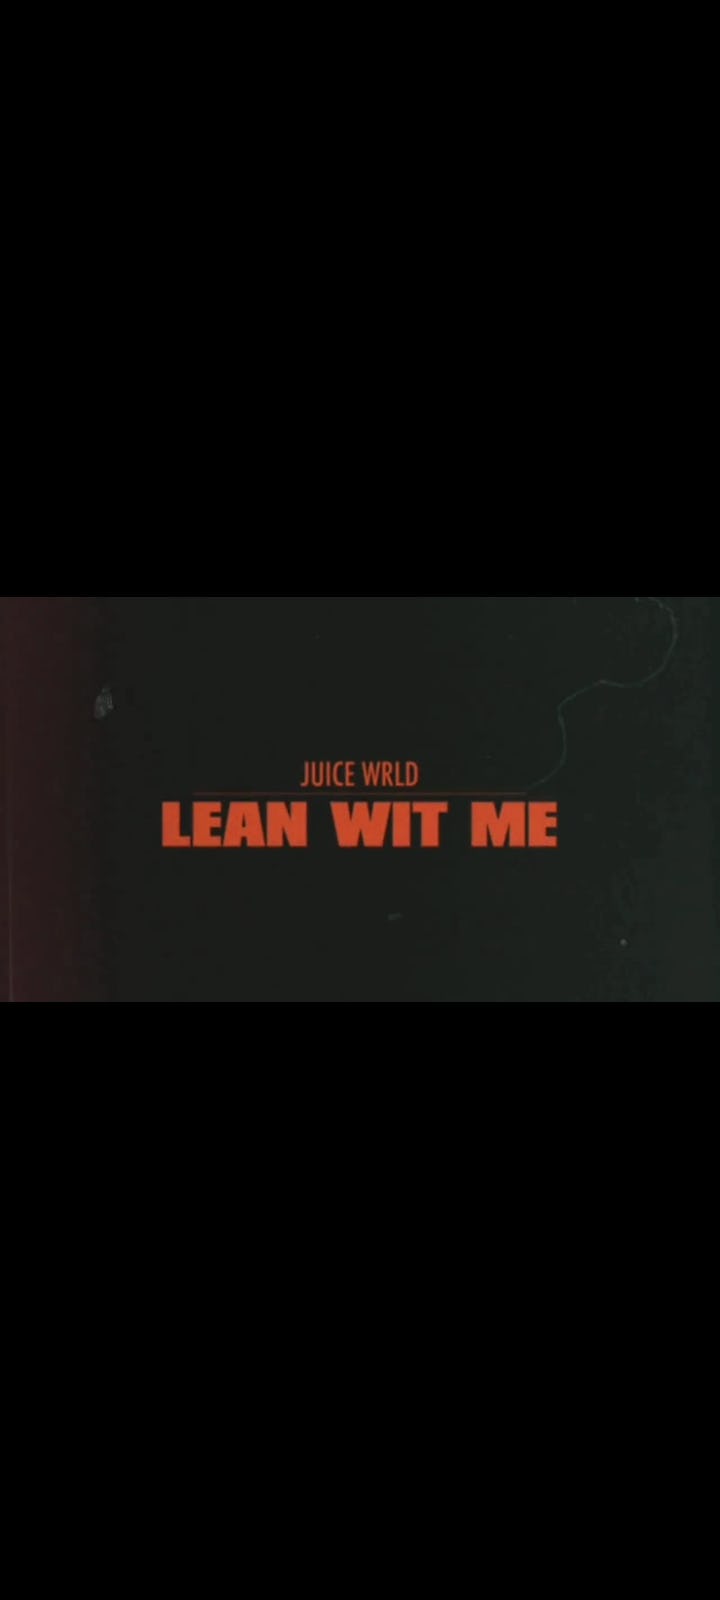 N.W.A Juice WRLD - Lean Wit Me with Coolio - Gangsta's Paradise
Remix song part 2